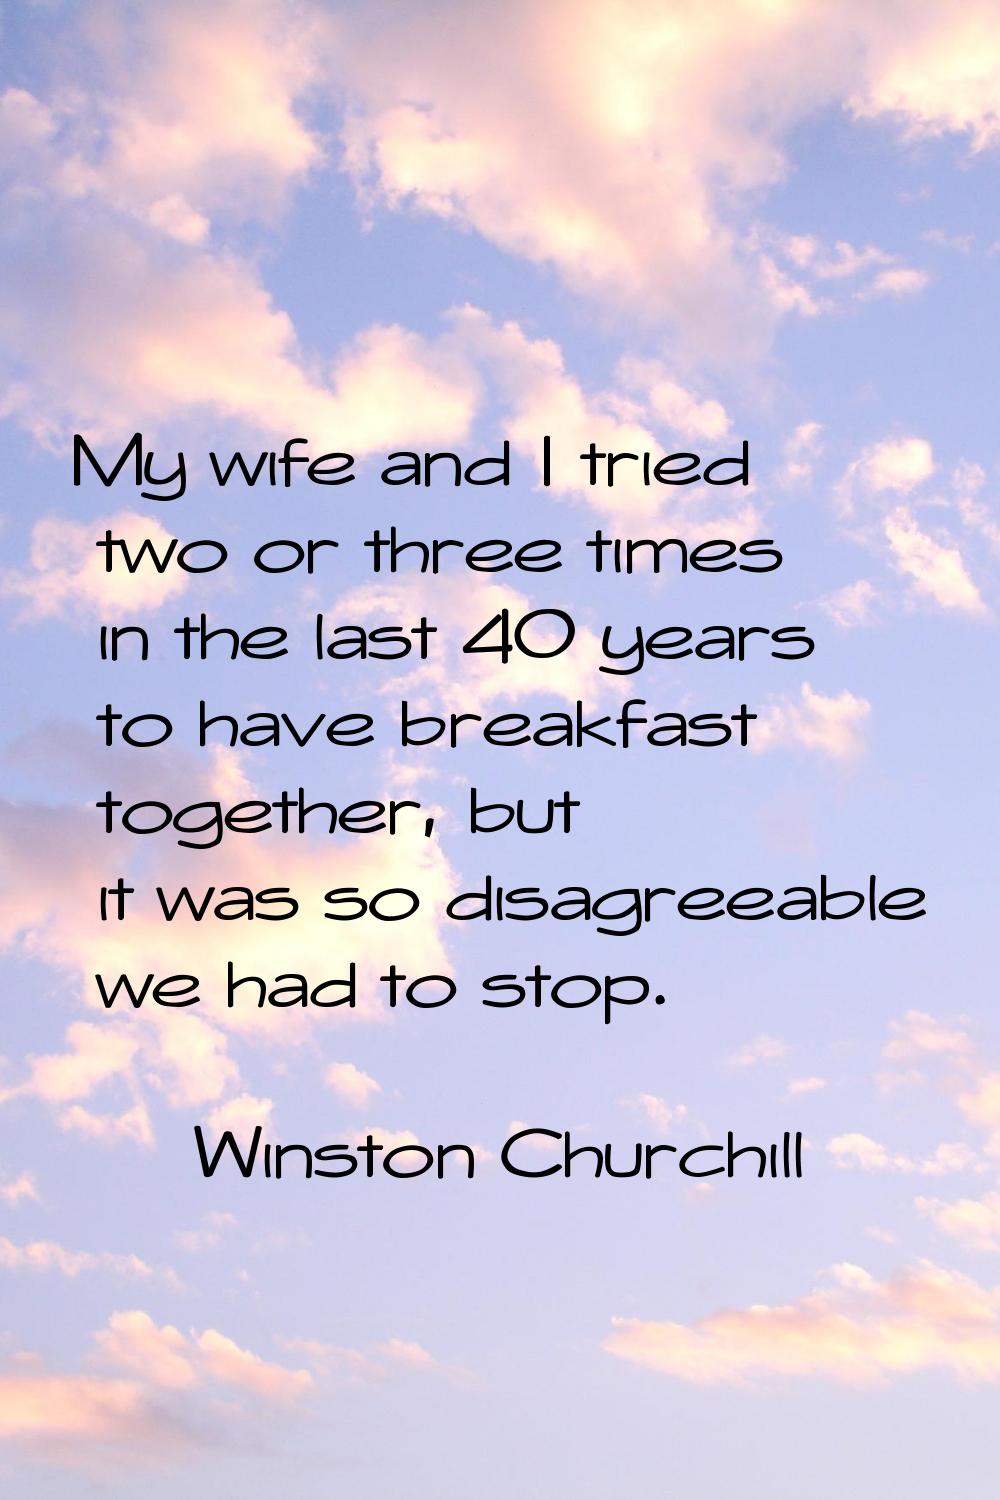 My wife and I tried two or three times in the last 40 years to have breakfast together, but it was 